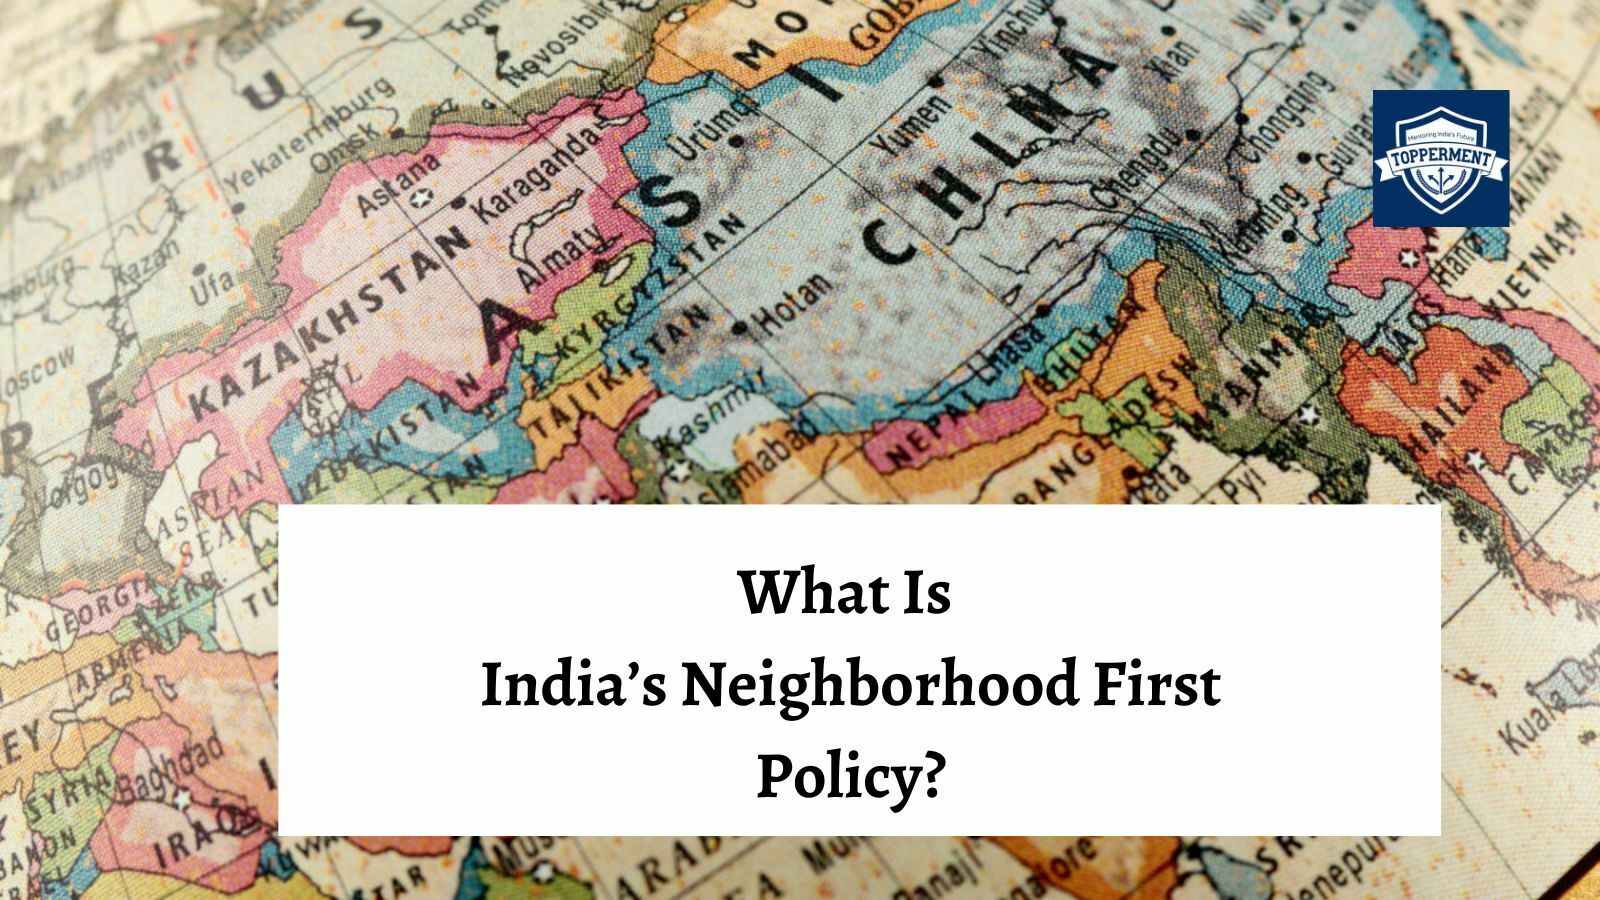 What Is India’s Neighborhood First Policy?-TopperMent